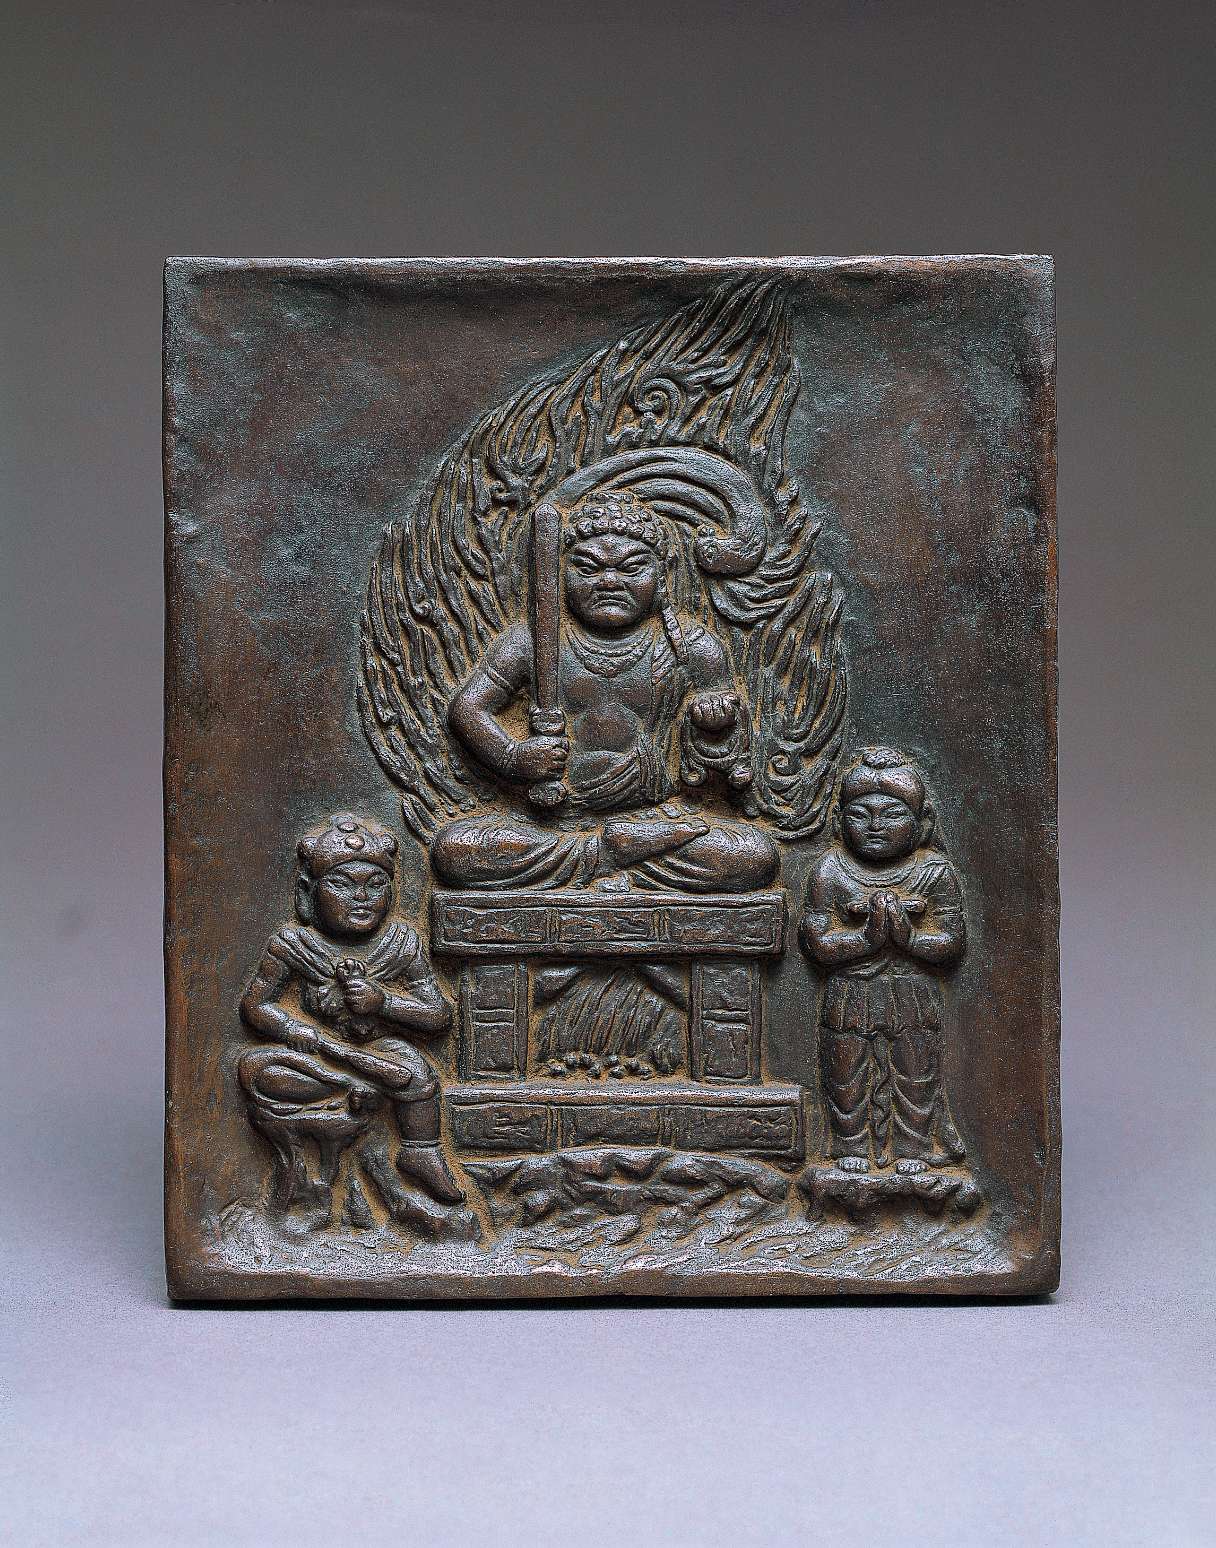 A dark, metallic relief of a scowling figure holding a sword in his right hand and a noose in the left, seated cross-legged on a throne amid a nimbus of stylized fire; two attendants stand to the left and right.